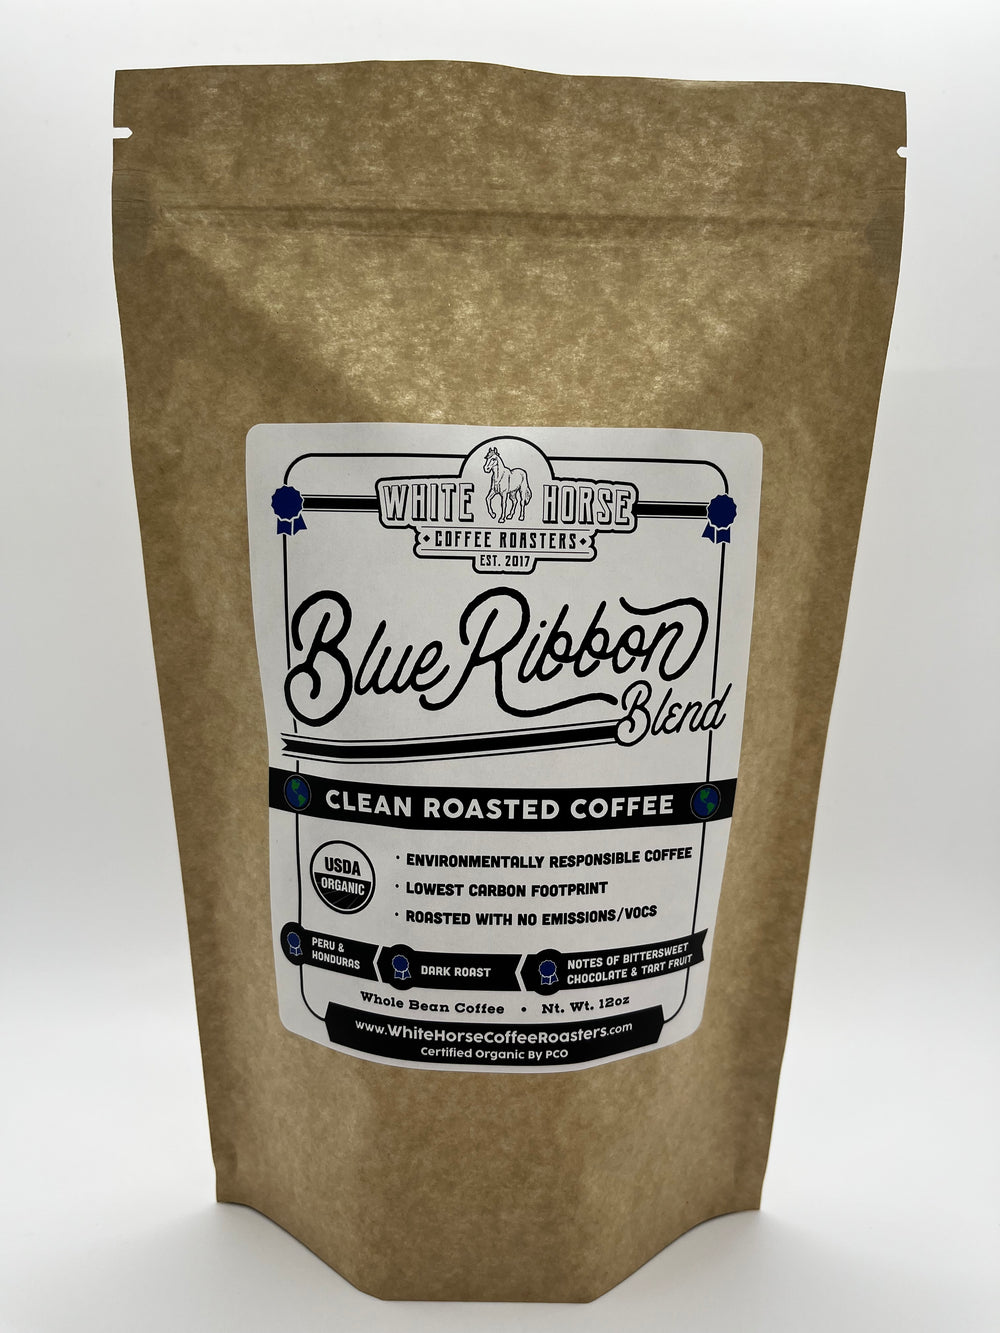 Blue Ribbon Blend Gourmet - Indulge in the luxury of coffee cafe franchise quality with each sip, brought to you by White Horse Coffee Roasters.